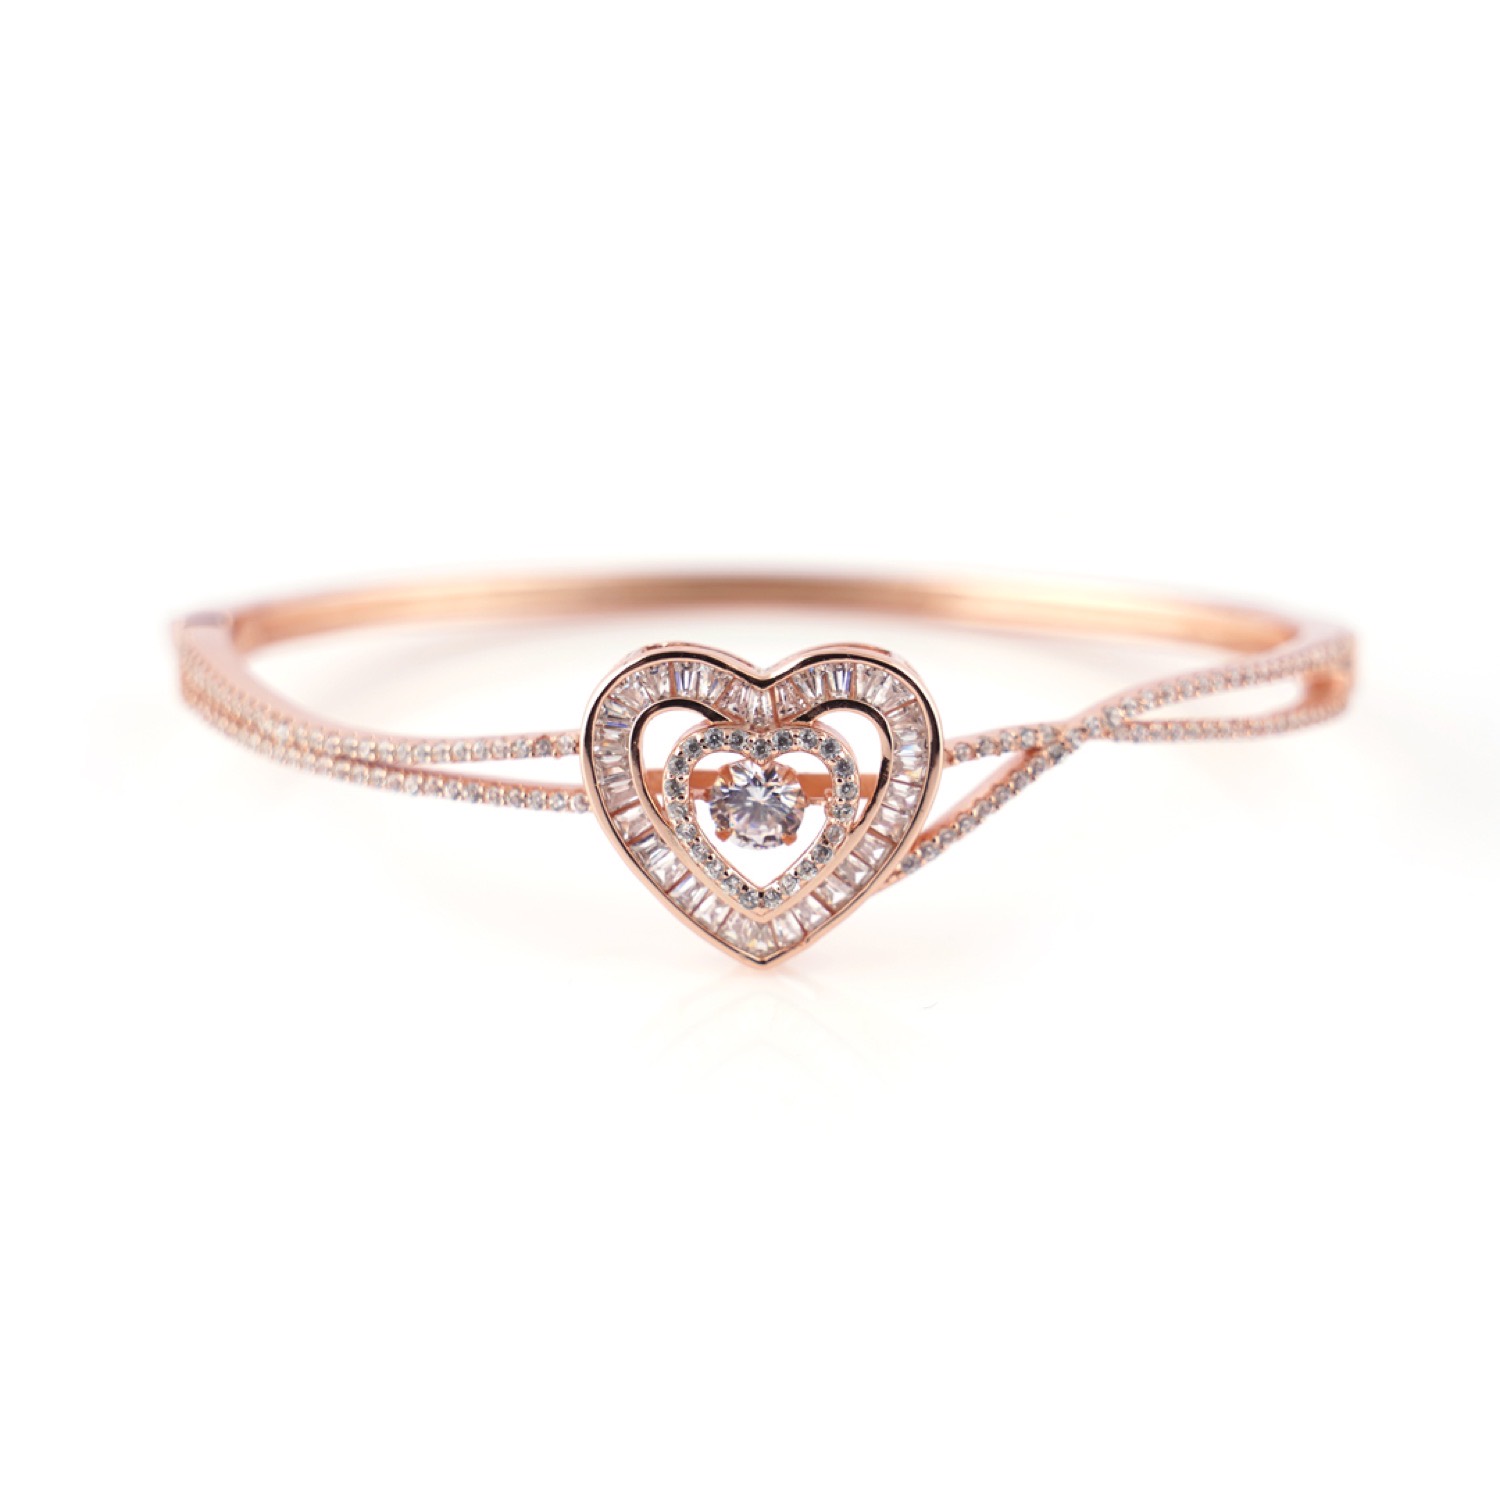 varam_bracelet_and_bangle_tapered_baugette_and_round_cut_white_stone_heart_shaped_open_type_rose_gold_silver_bracelet-1